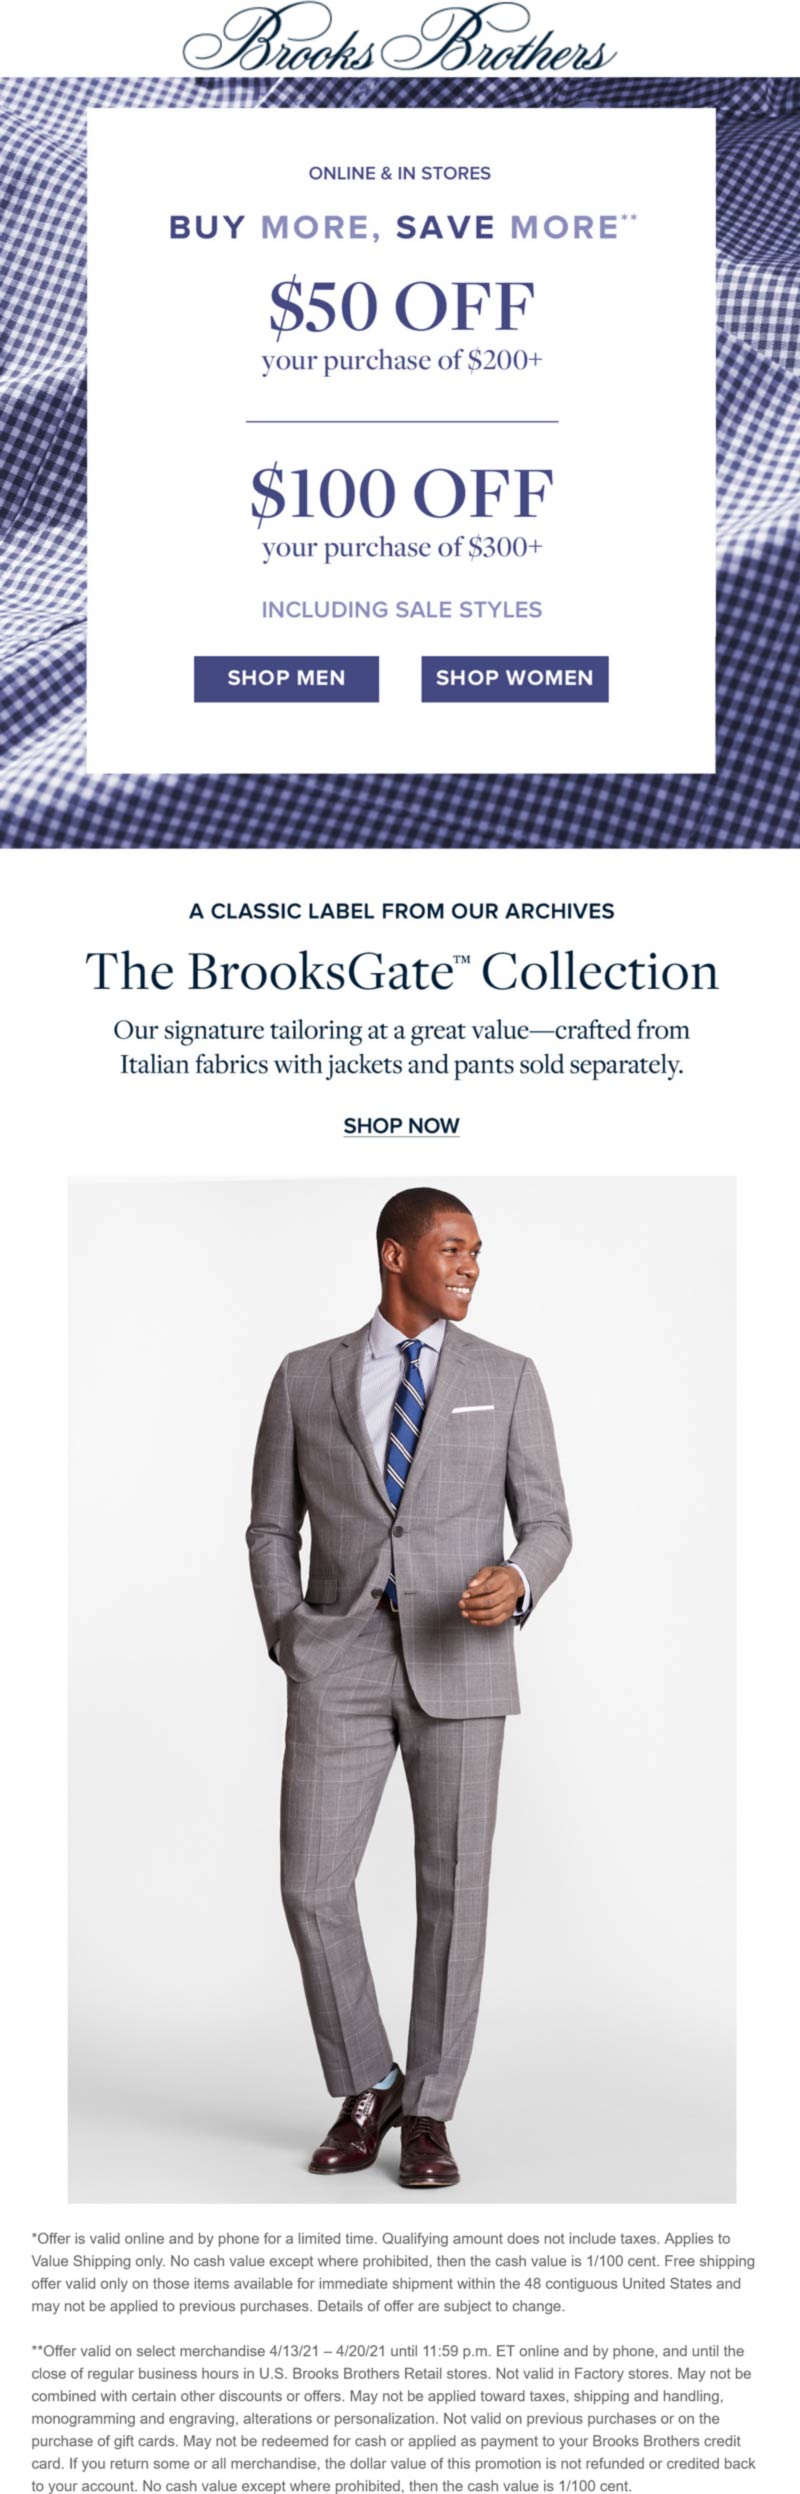 Brooks Brothers stores Coupon  $50 off $200 & more at Brooks Brothers, ditto online #brooksbrothers 